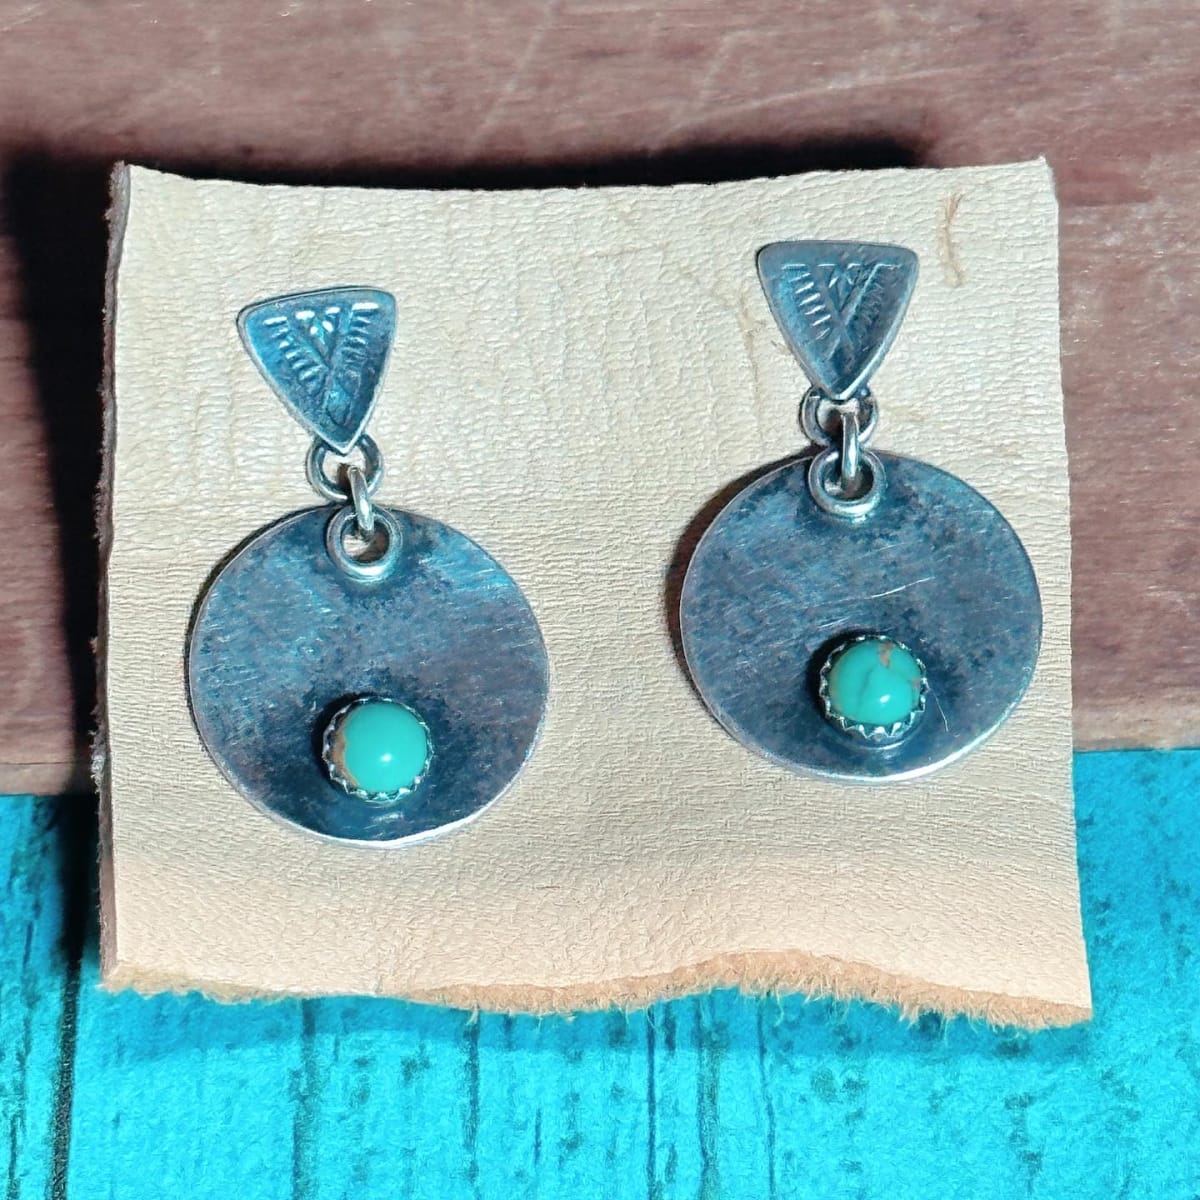 "Single Stone Stamped Luna Earrings" - Sterling Silver and Kingman Turquoise, Triangle Stamp Detail by Shasta Brooks  Image: All Art © Shasta Brooks Studio LLC